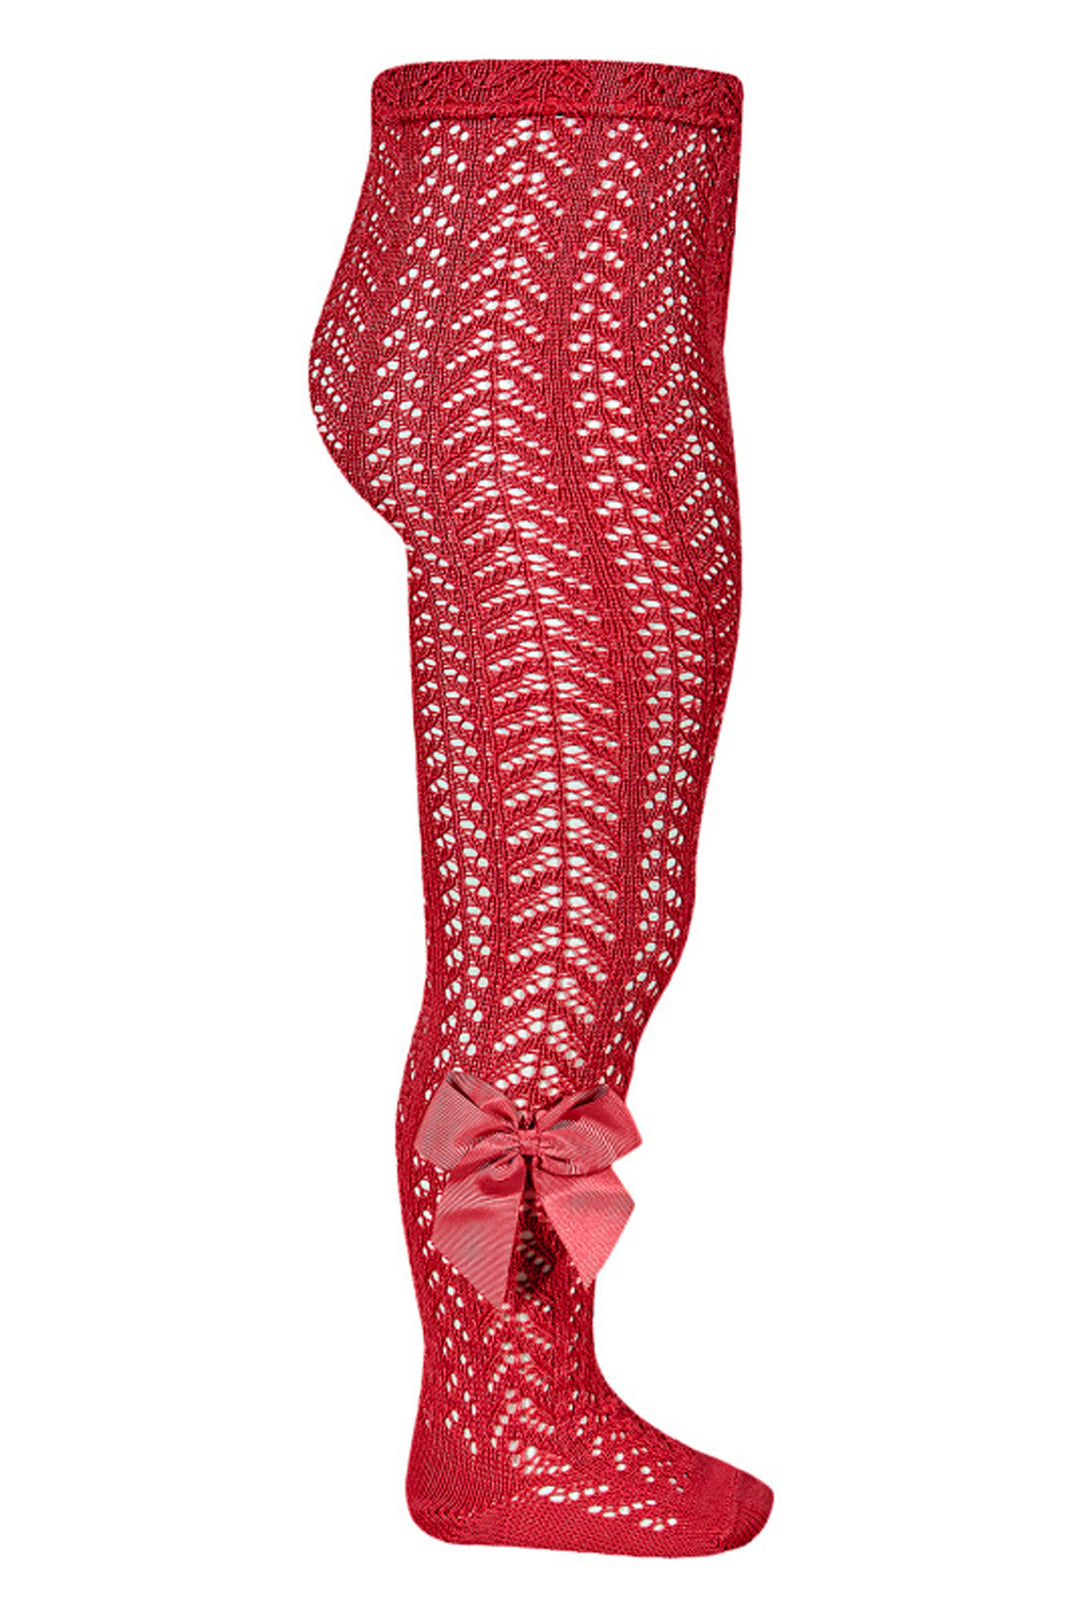 Condor Red Lace Openwork Bow Tights | Millie and John